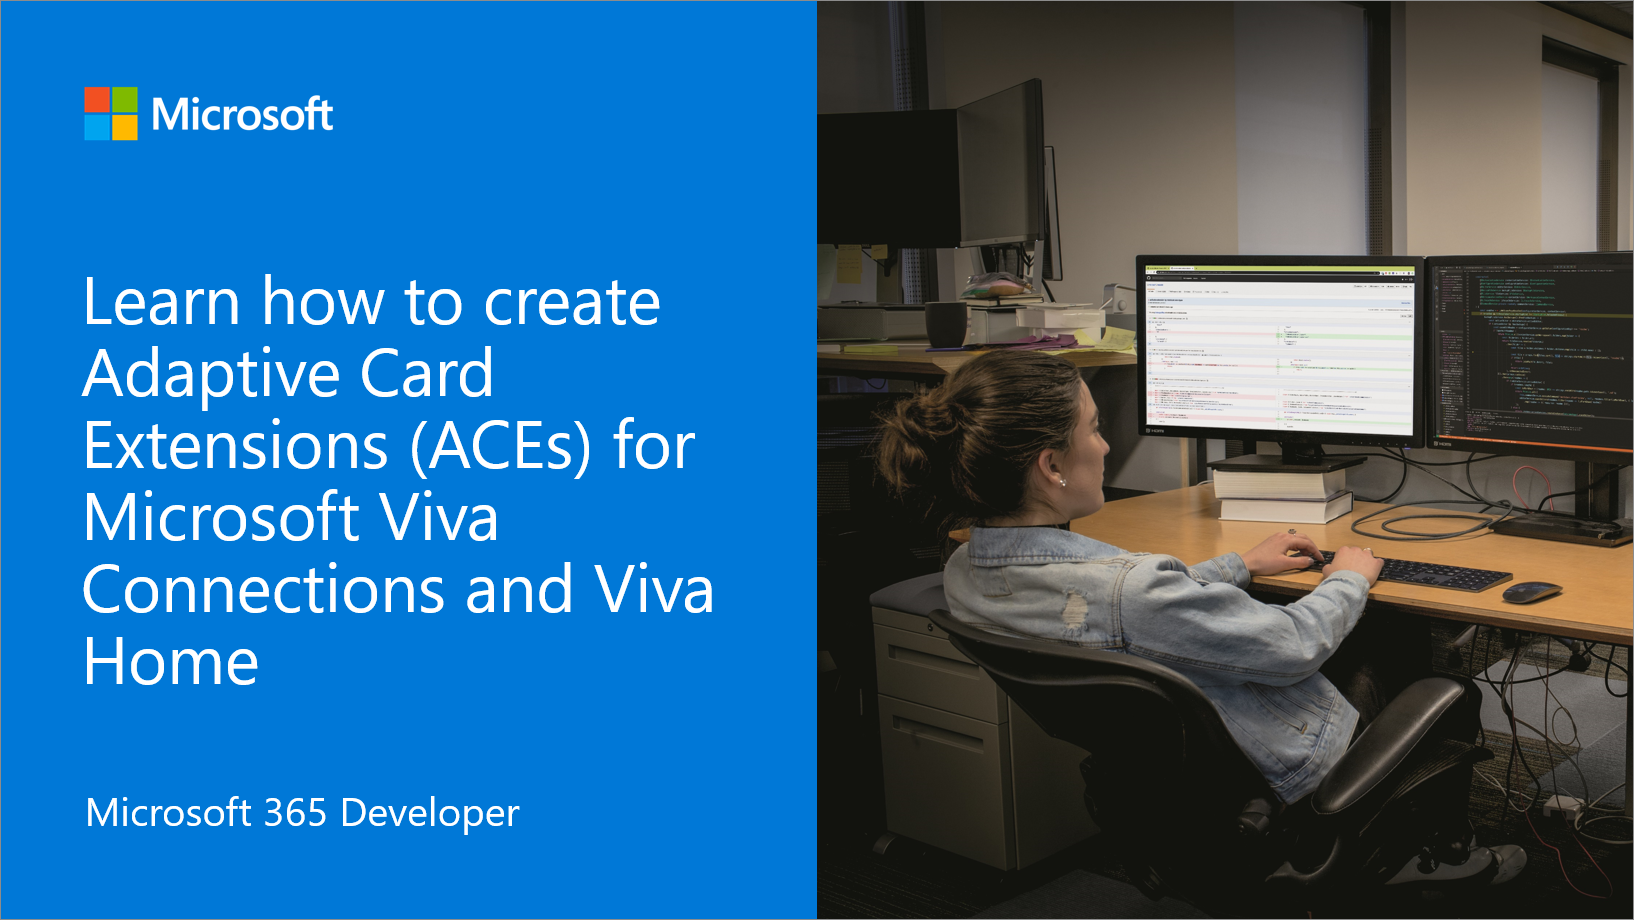 Learn how to create Adaptive Card Extensions (ACEs) for Microsoft Viva Connections and Viva Home